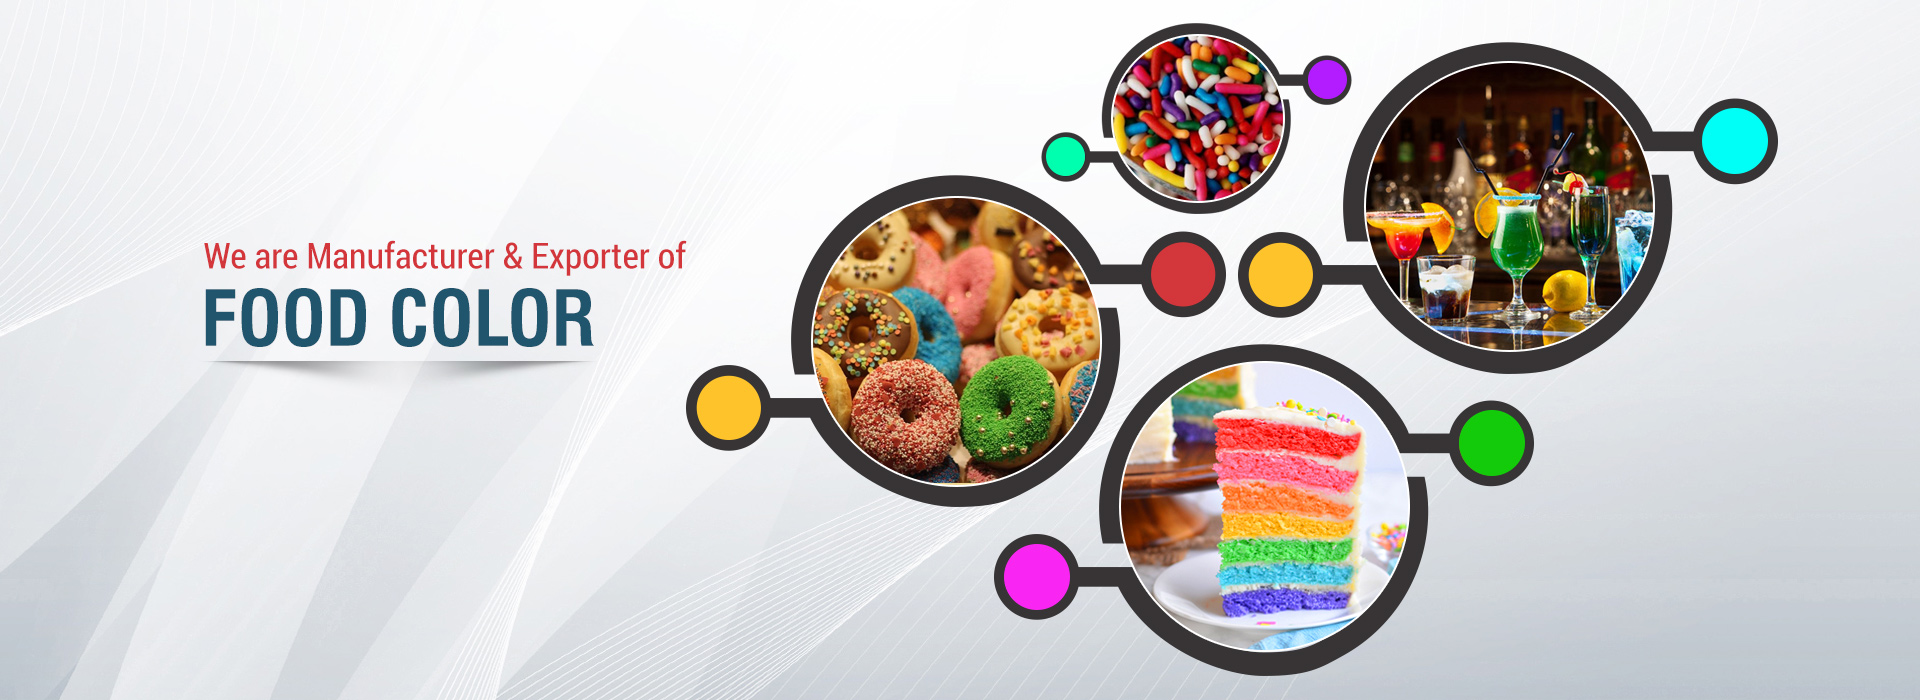 Food Color Manufacturer and Exporter in India